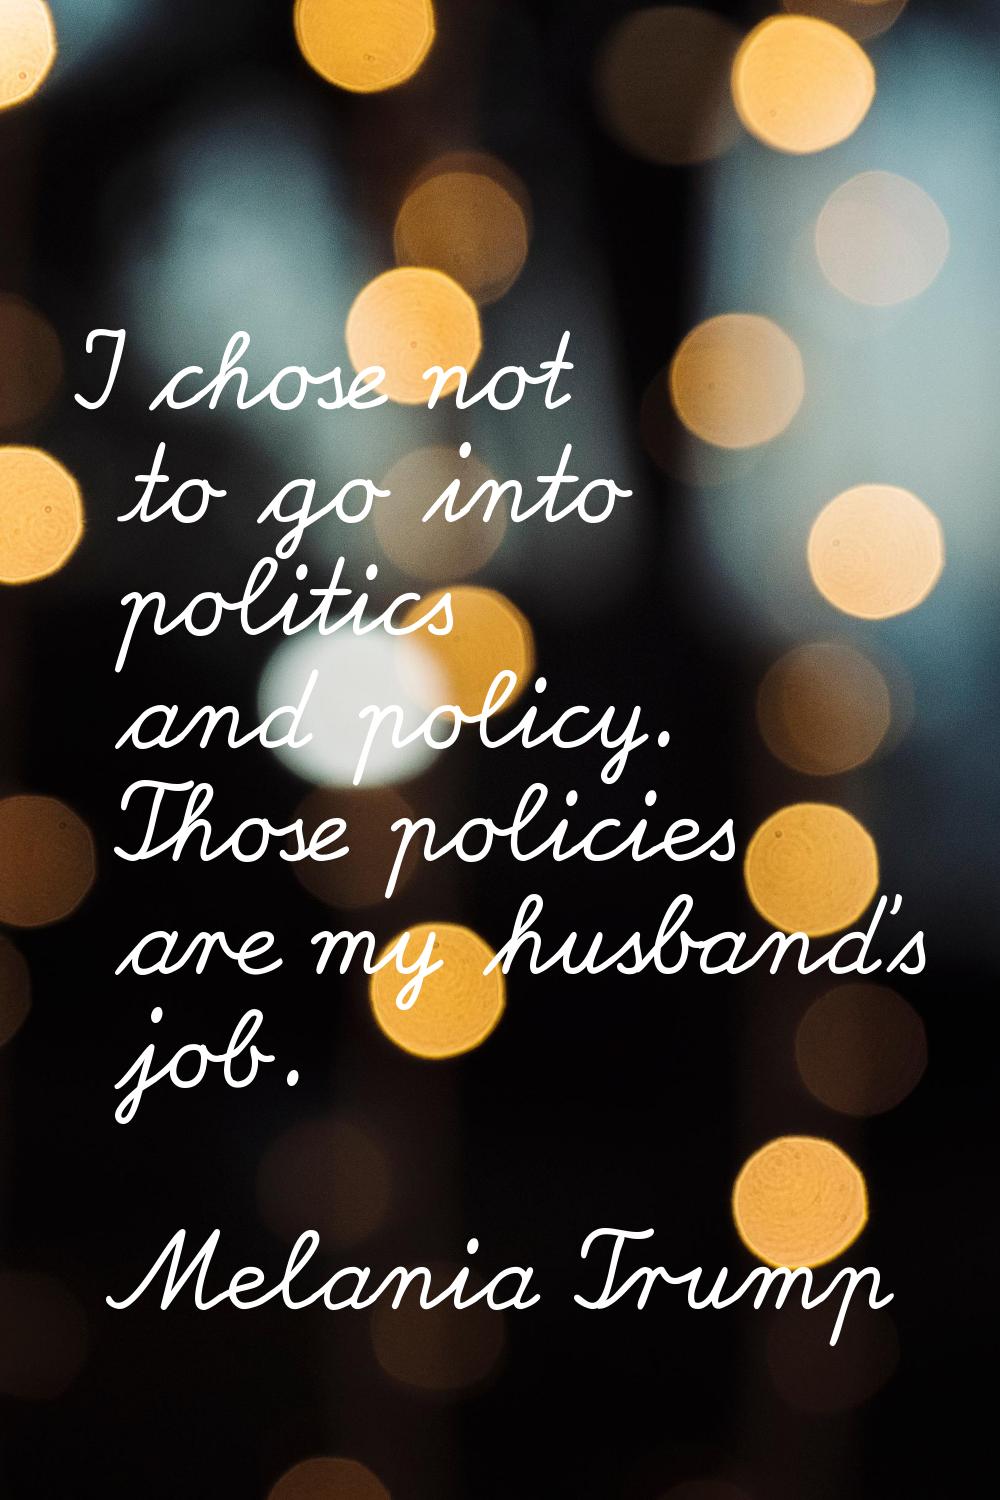 I chose not to go into politics and policy. Those policies are my husband's job.